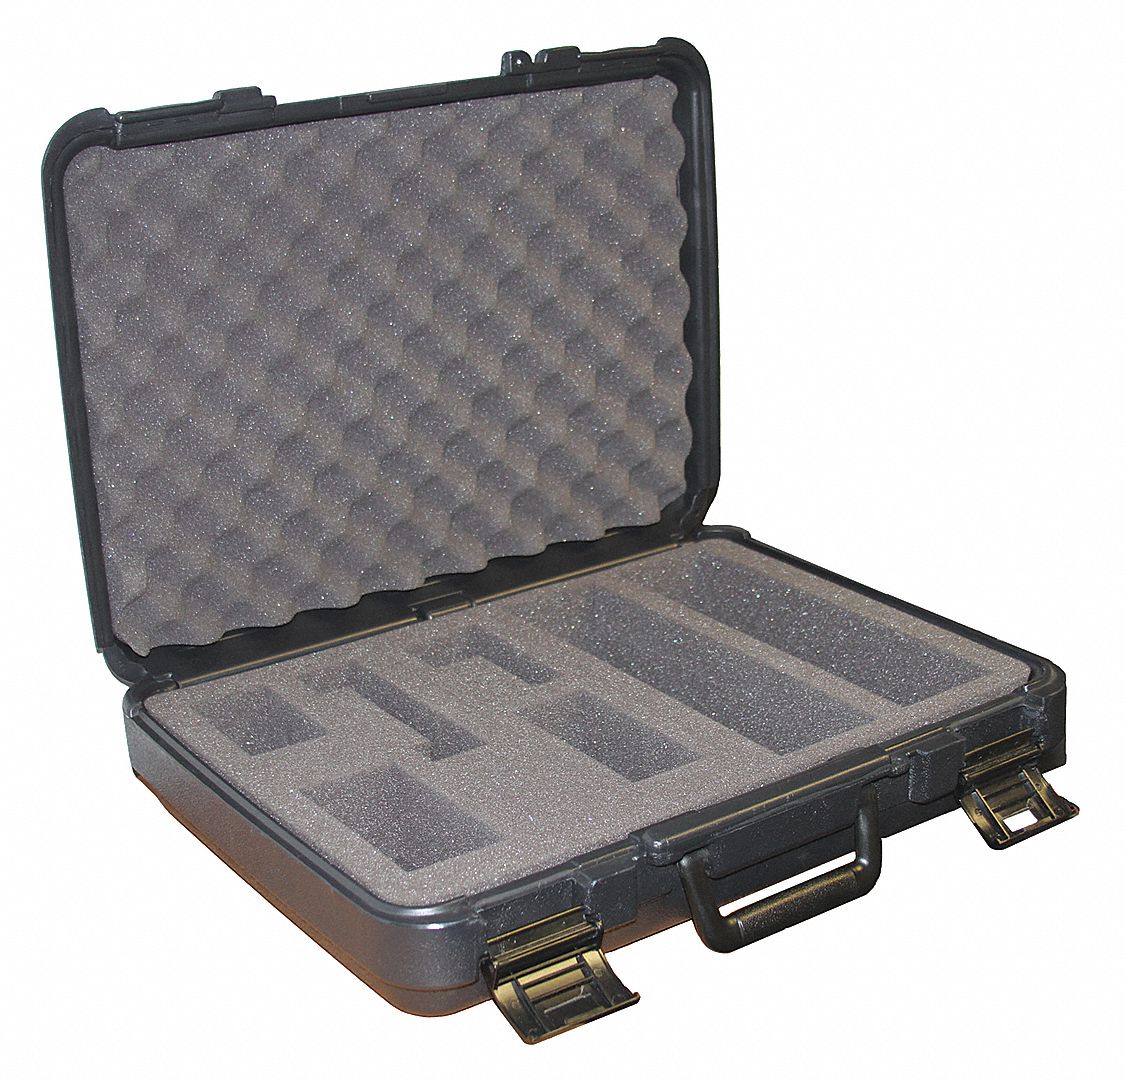 Carrying Case: 19 1/4 in Lg, Black, Top and Bottom Foam  Inserts